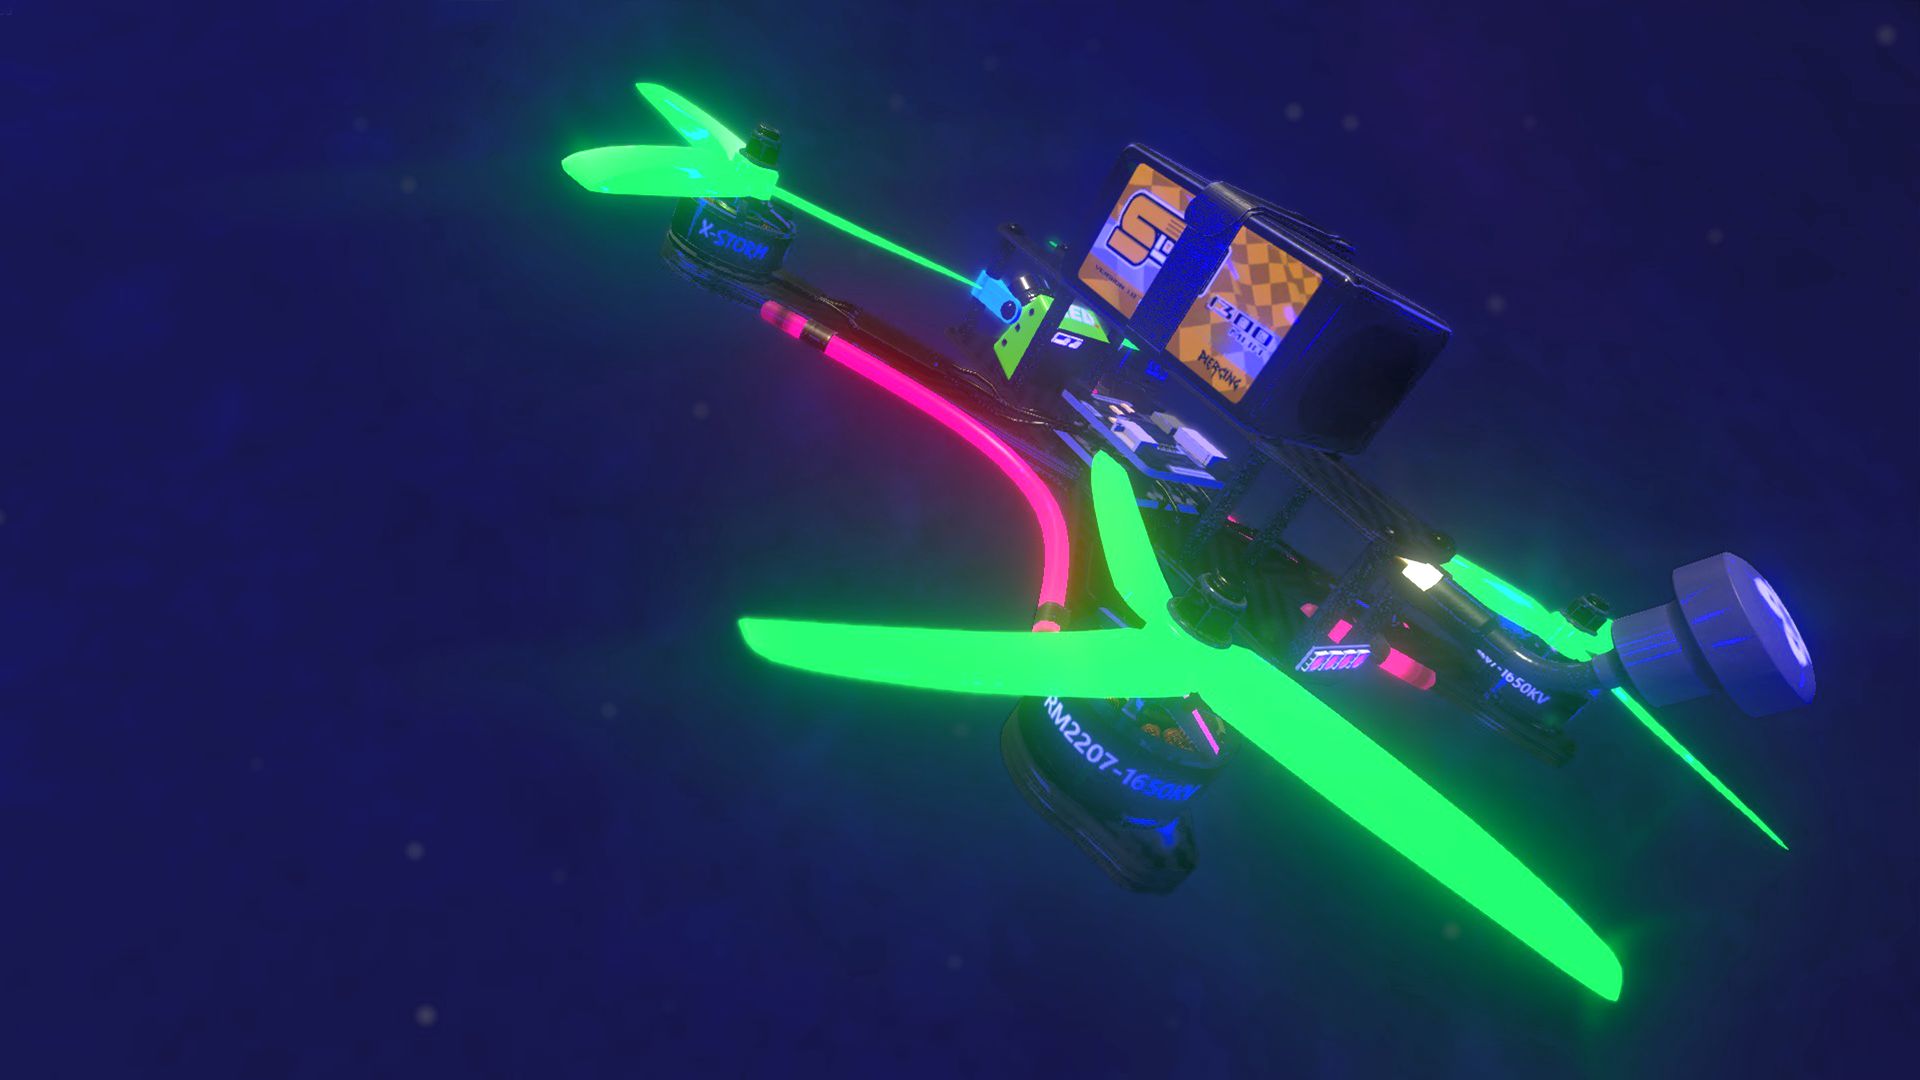 Liftoff Drone Racing Campaign Mode Revealed, Coming to PS4, Xbox One Later This Year